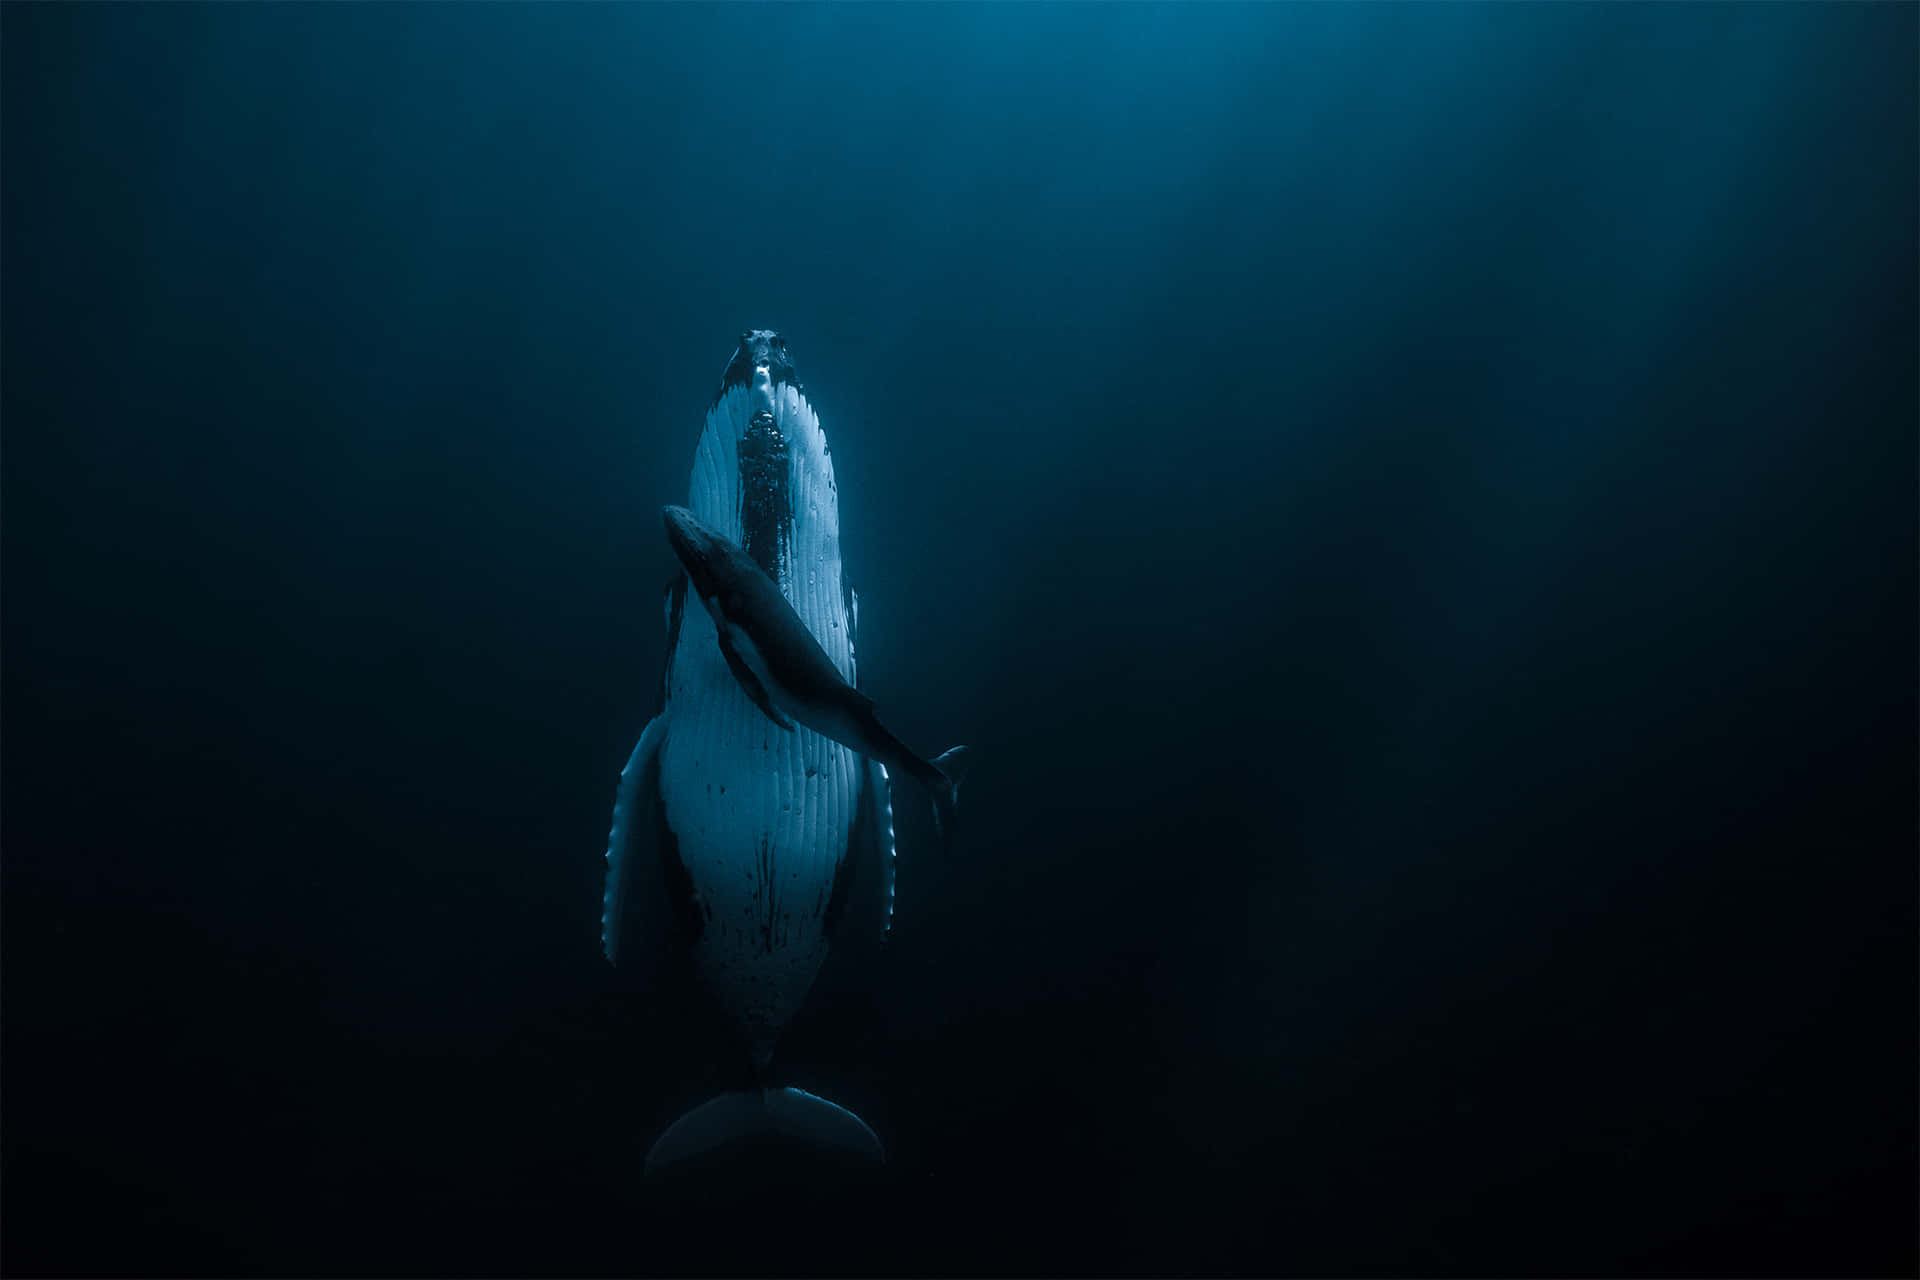 Scary Ocean Whale And Calf Picture 2000 x 1333 Picture